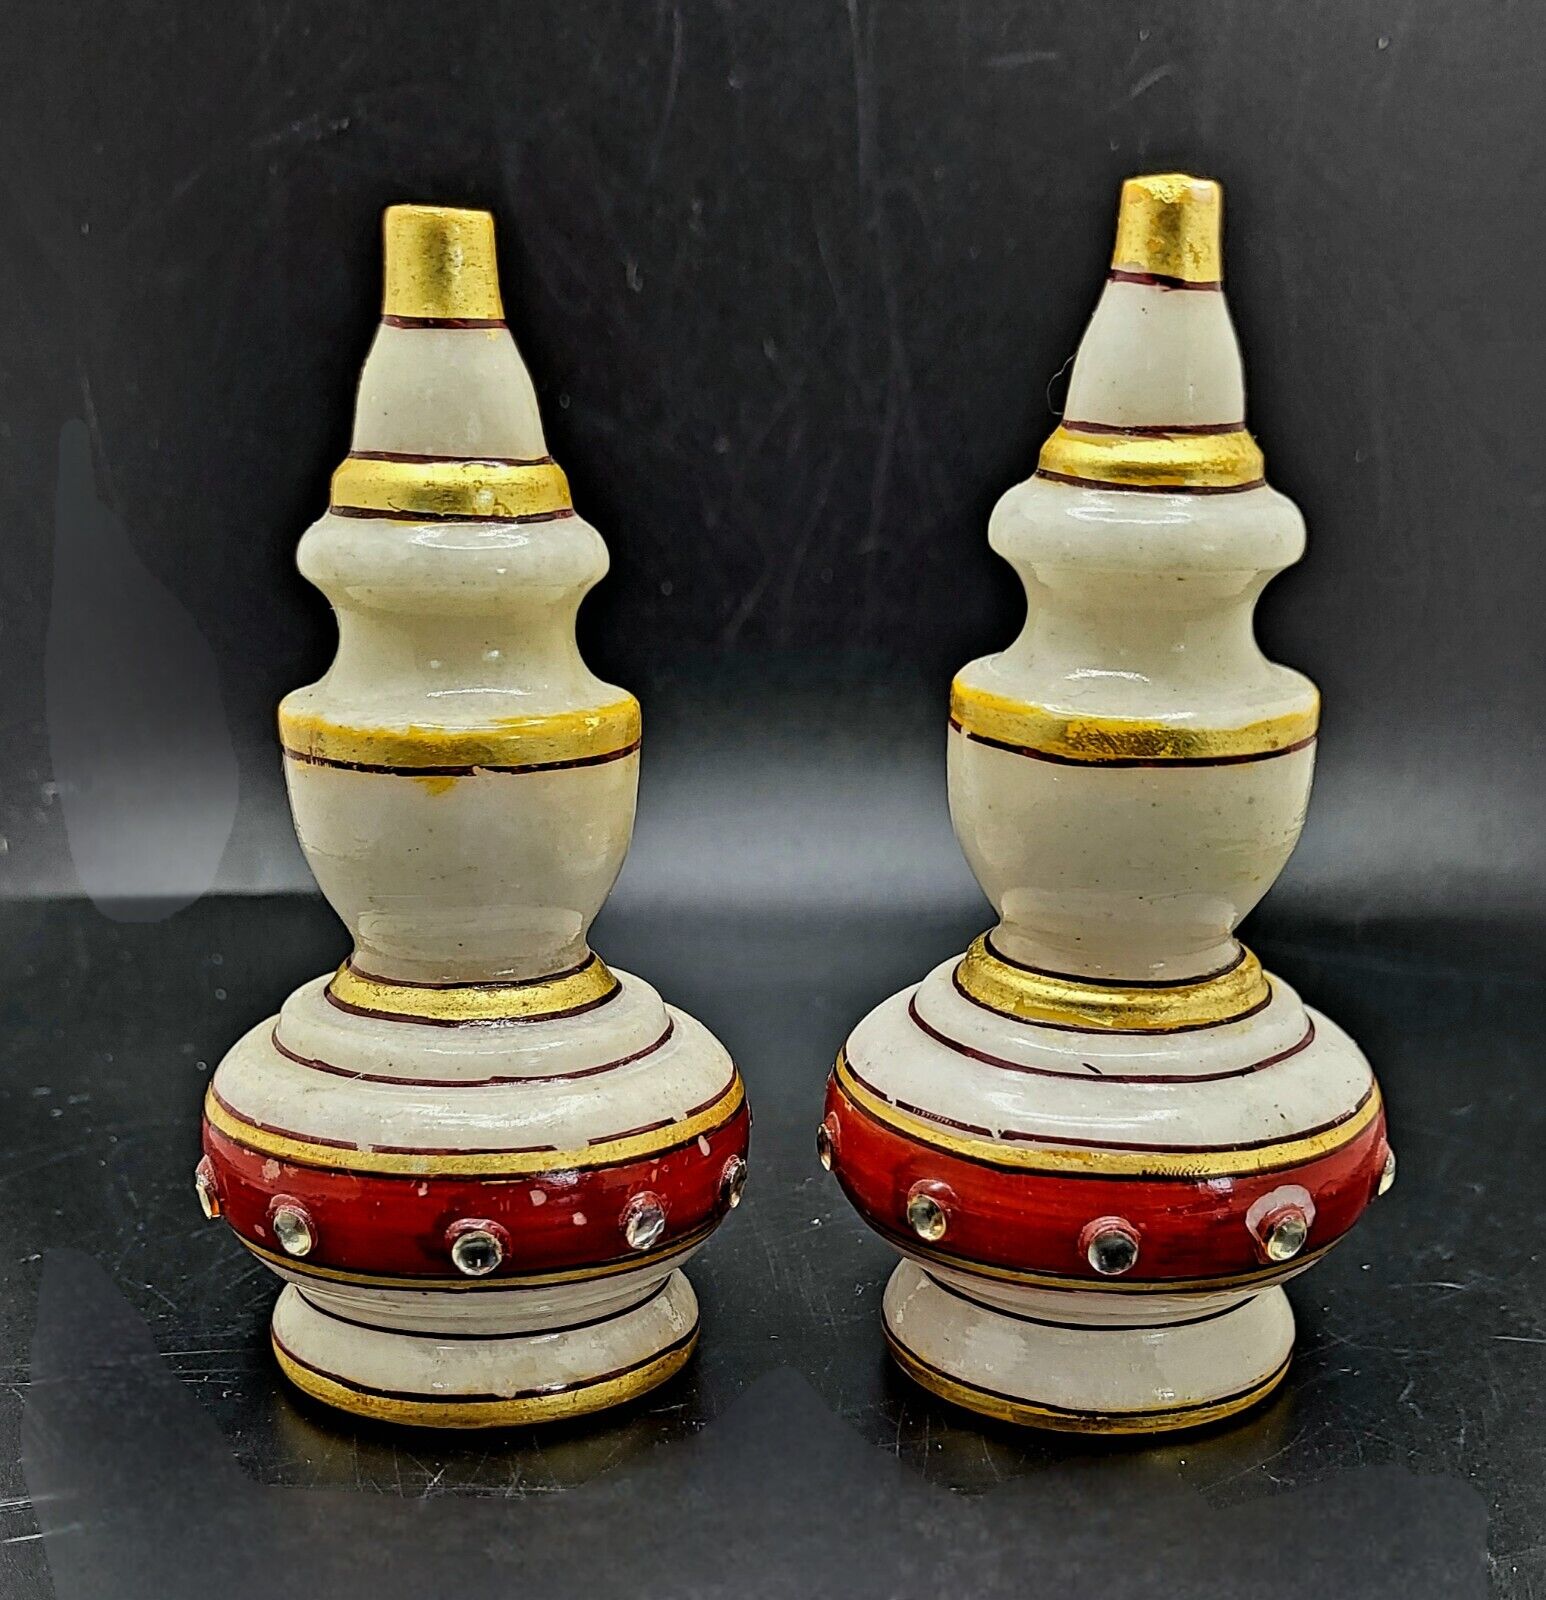 Lot of 2 Hindu India Marble Religious Decor Painted Embellishments Gold Red 